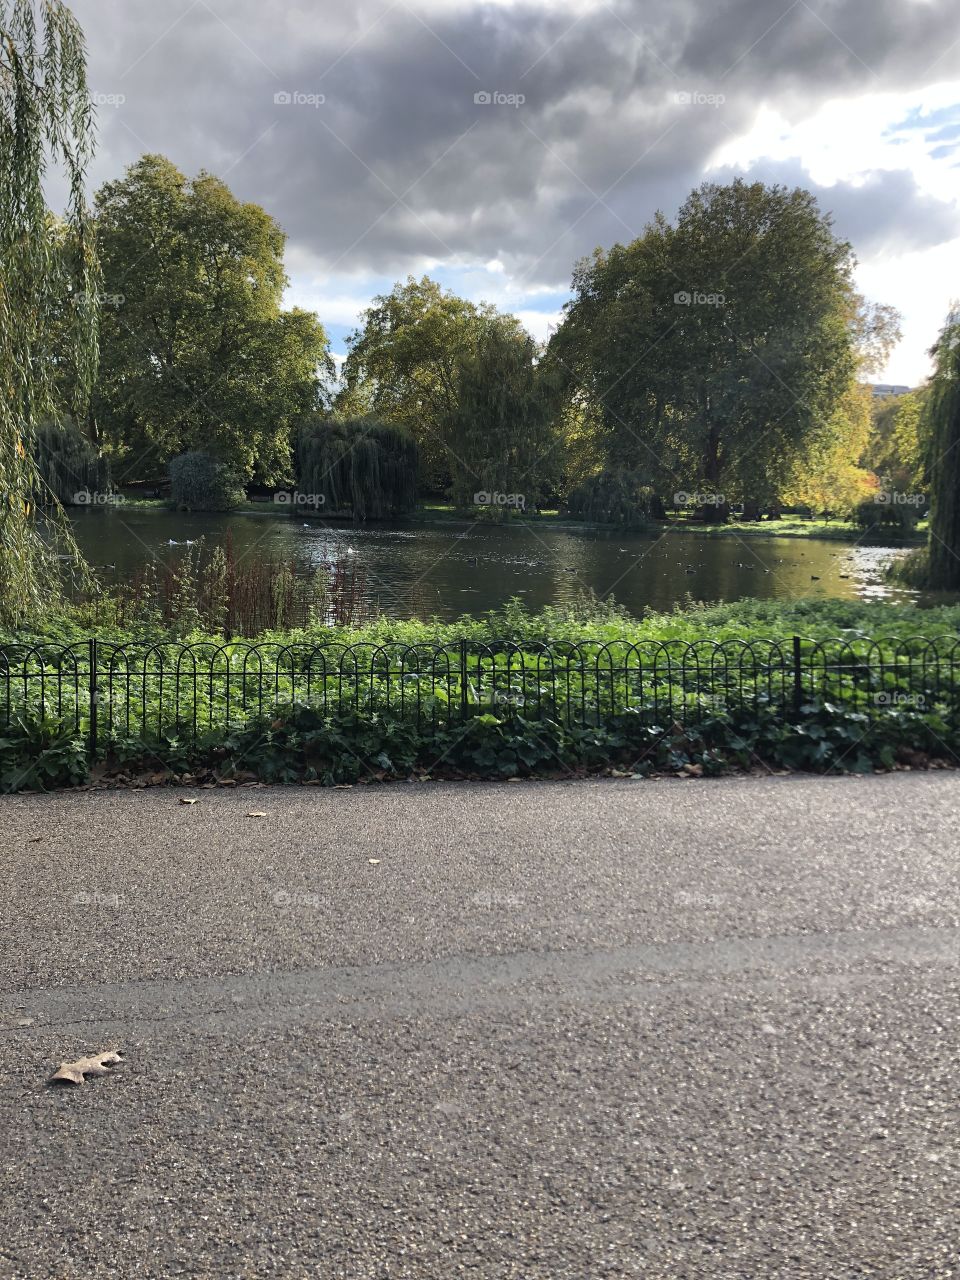 A peaceful, serene picture of one of the many lakes in the St. James Gardens by Buckingham Palace. 